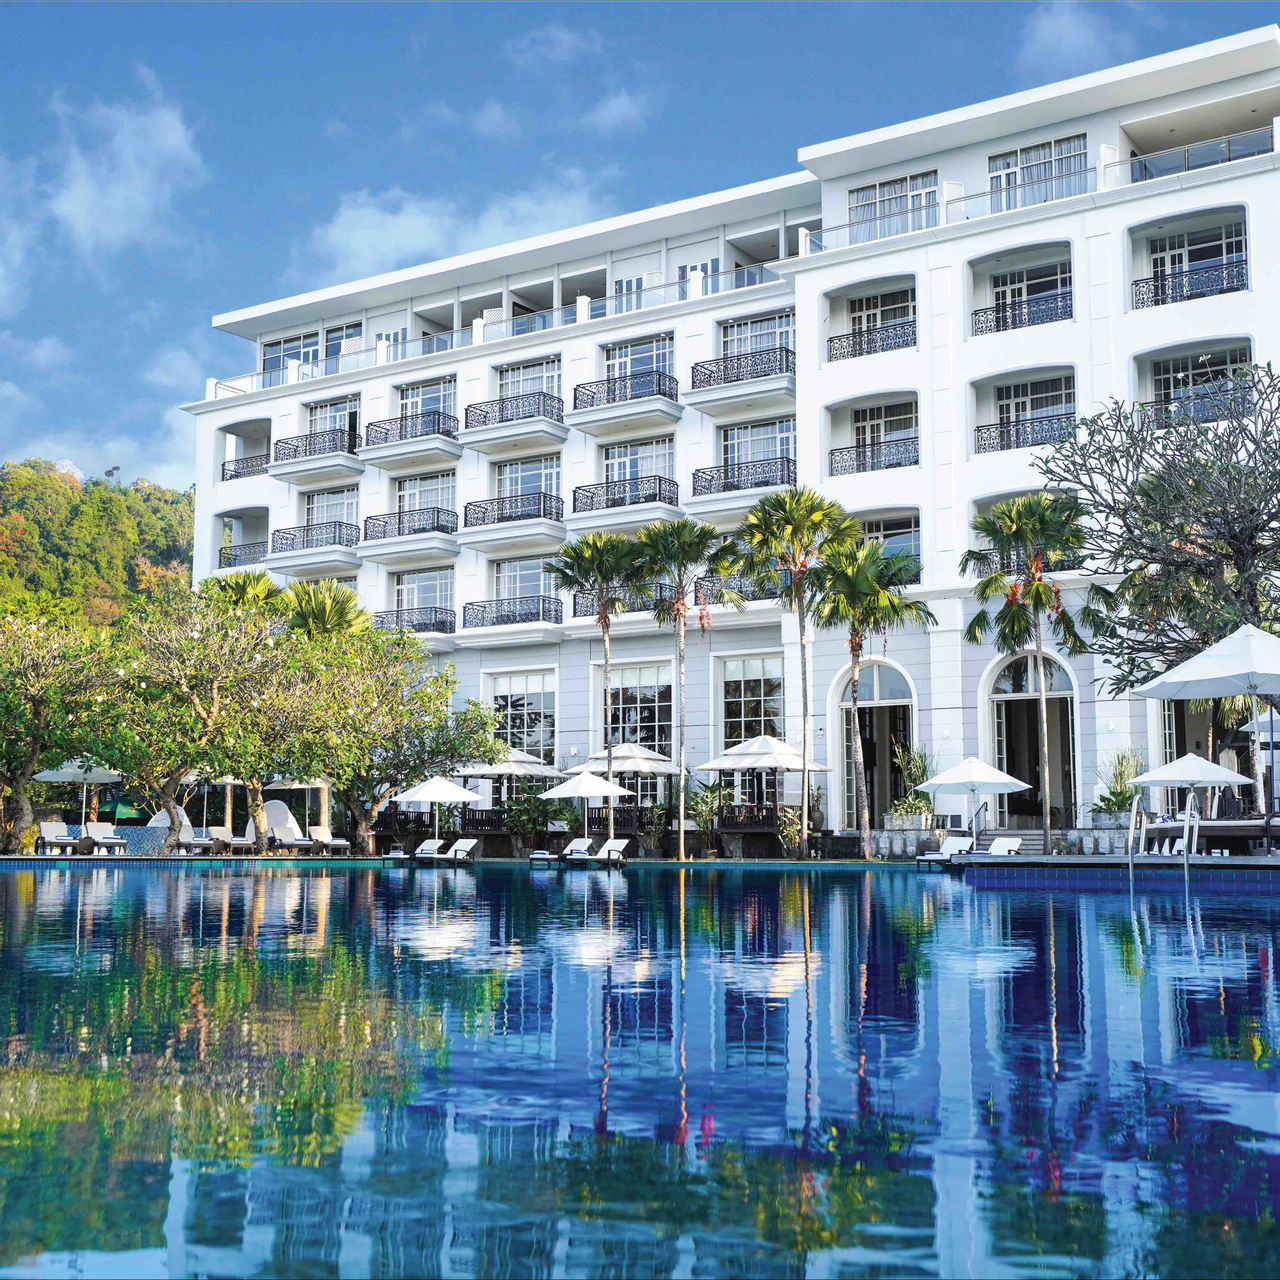 The Danna Langkawi - A Member of Small Luxury Hotels of the World, Langkawi